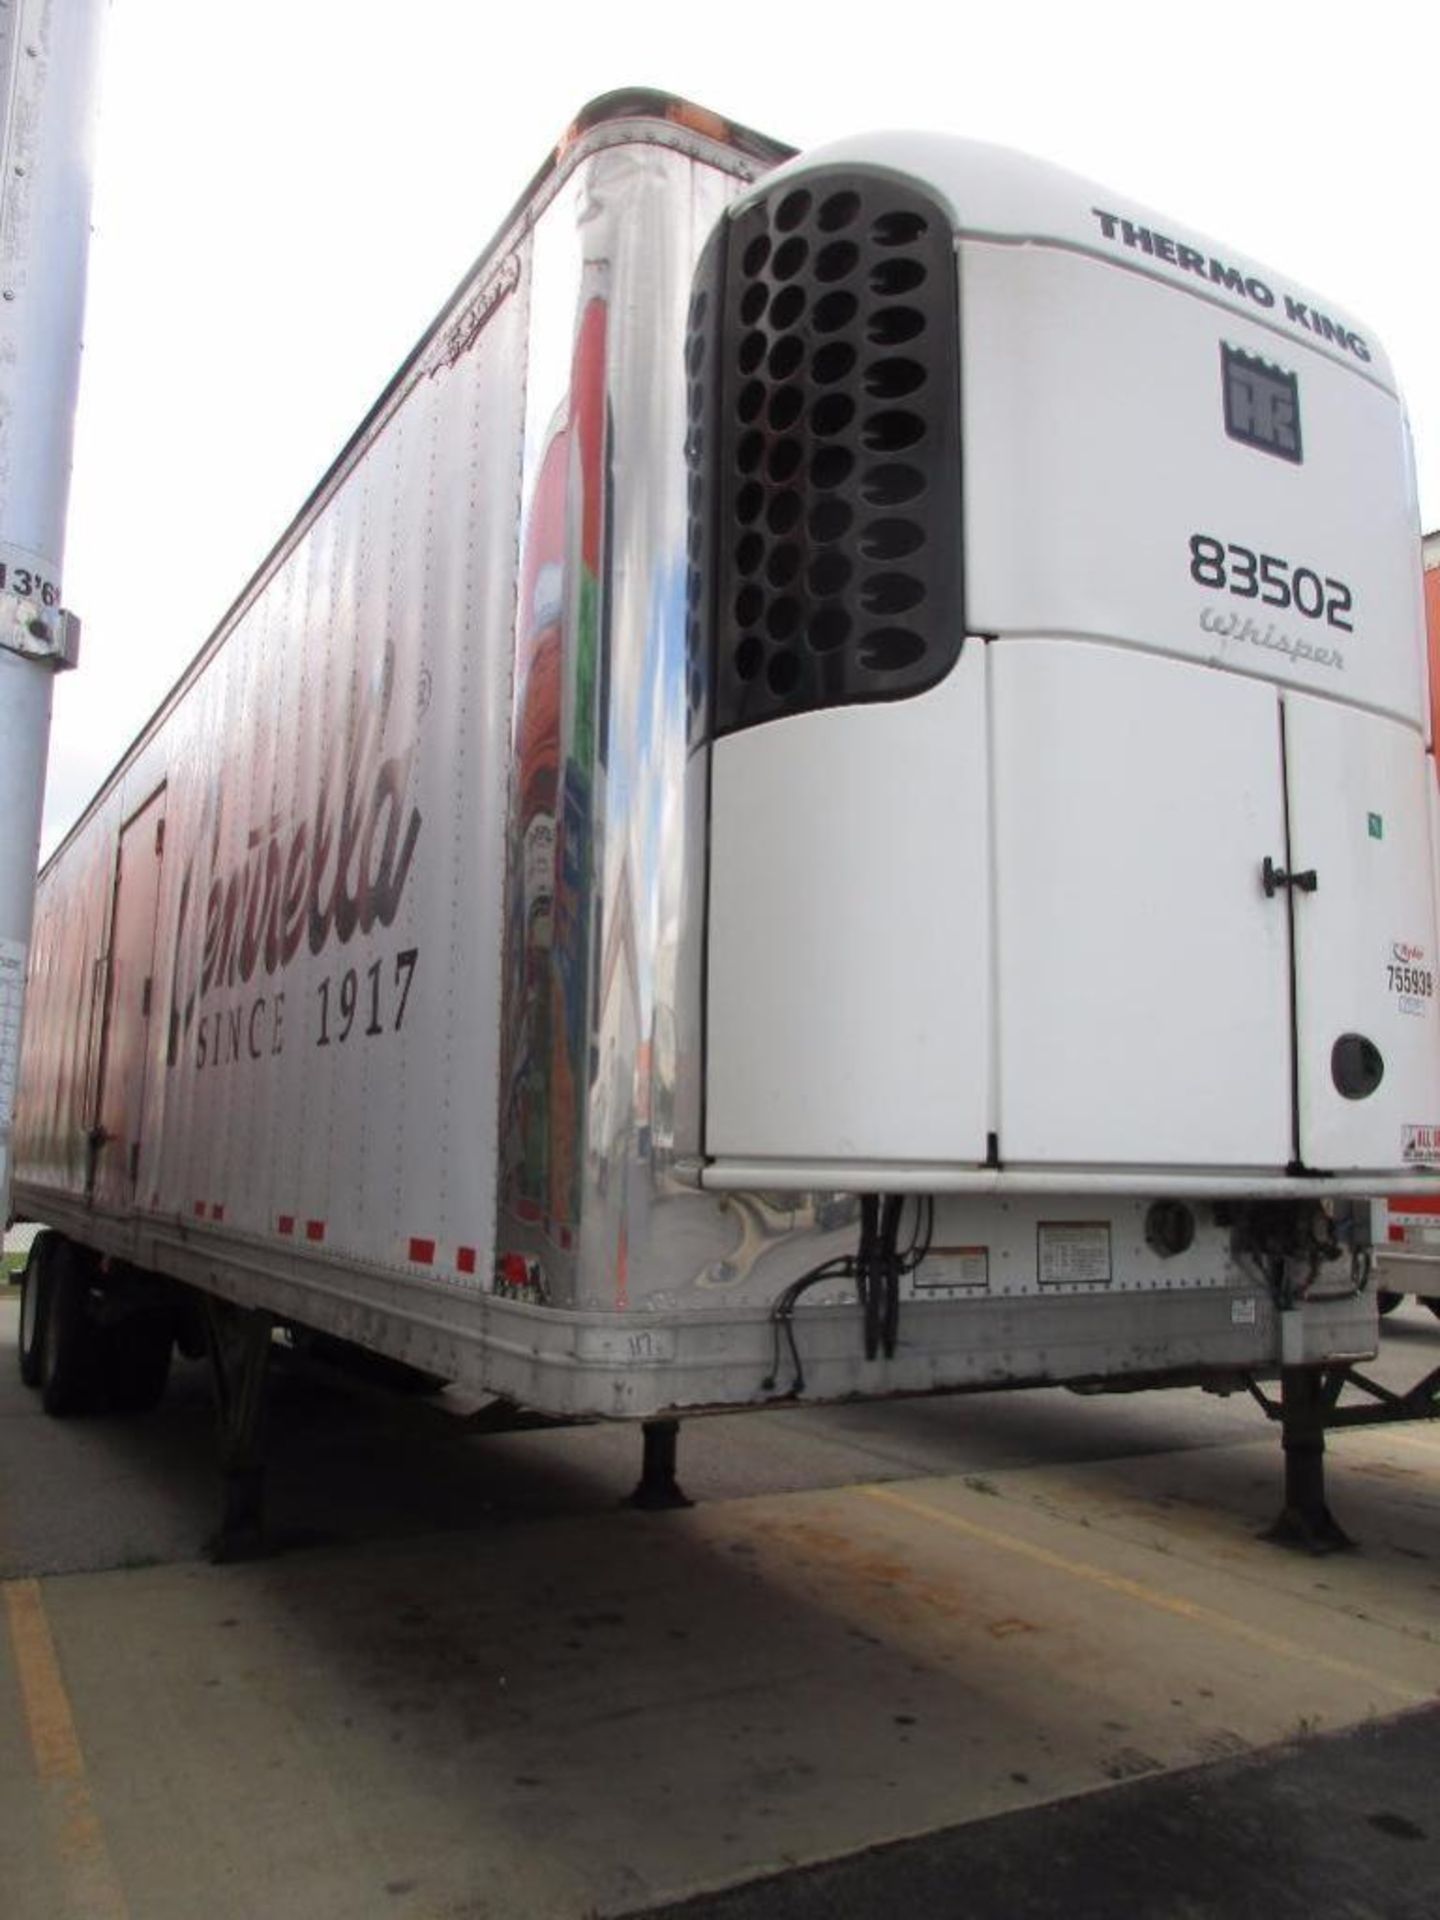 2004 Great Dane 35' Refrigerated Trailer, VIN # 1GRAA70275B703706, Unit 83502 - Image 2 of 28